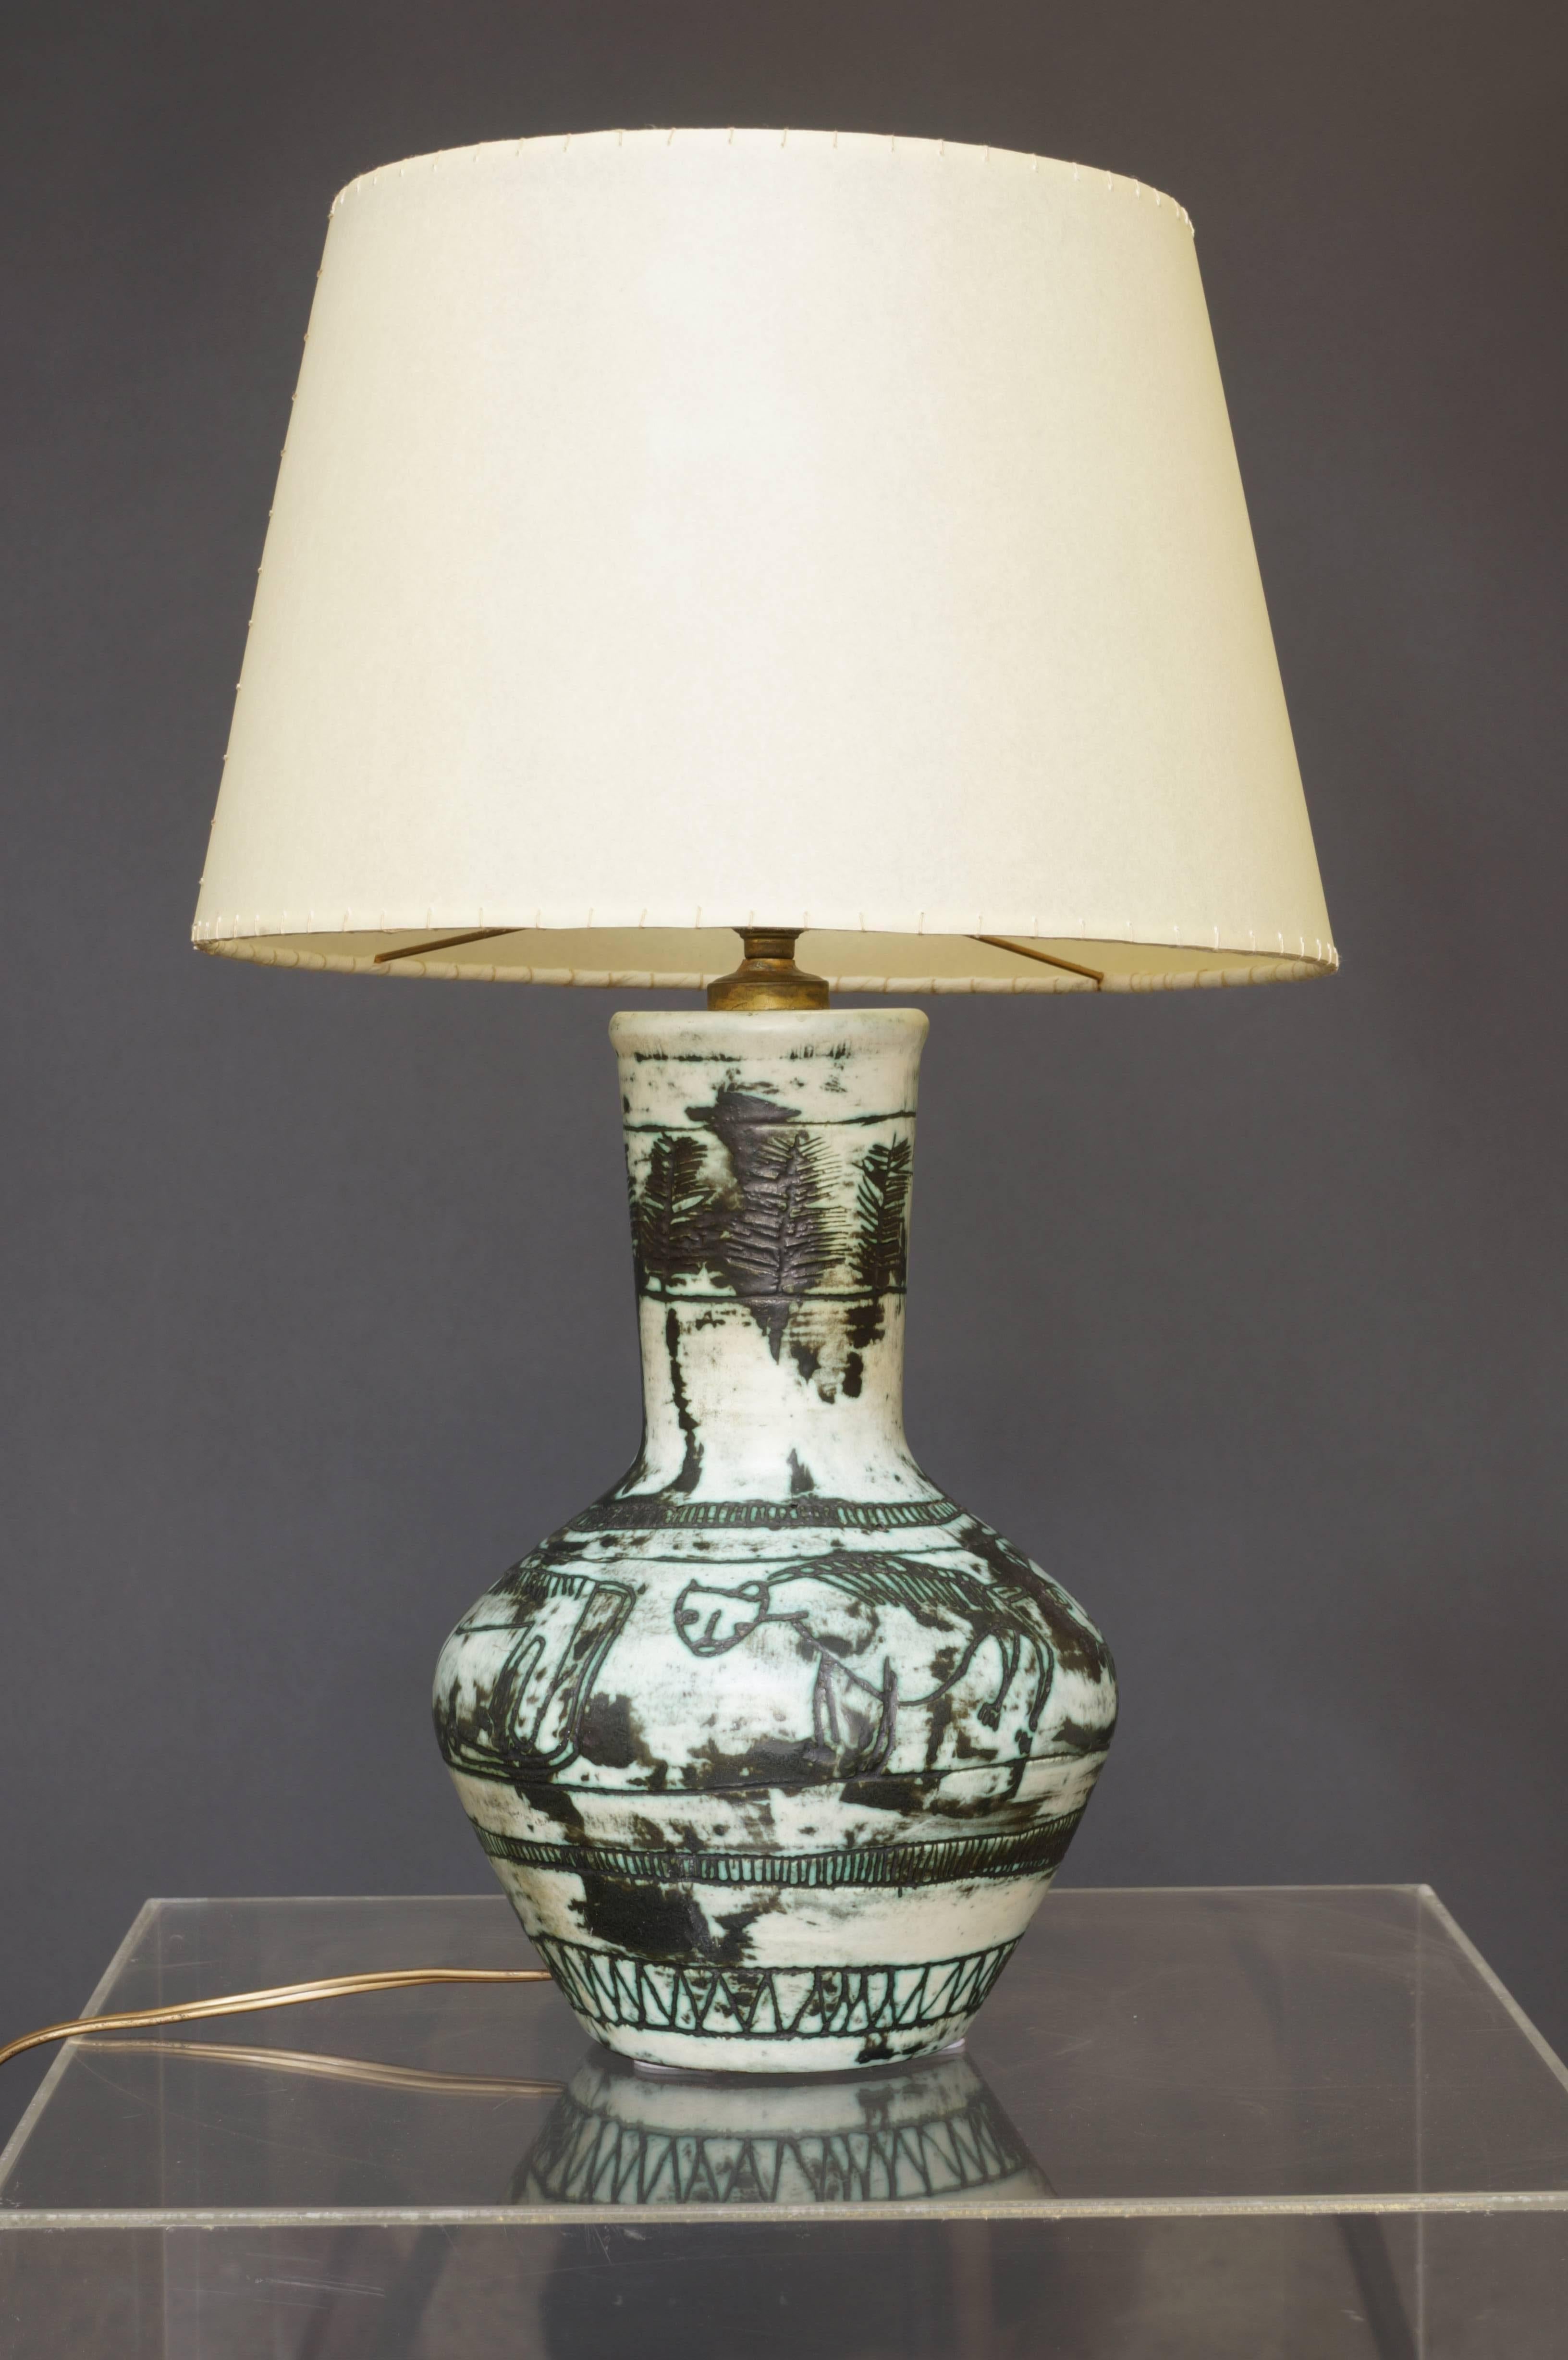 Jacques Blin French ceramic table lamp with green engraved decoration of stylised animals and trees, signed J. Blin, circa 1950.